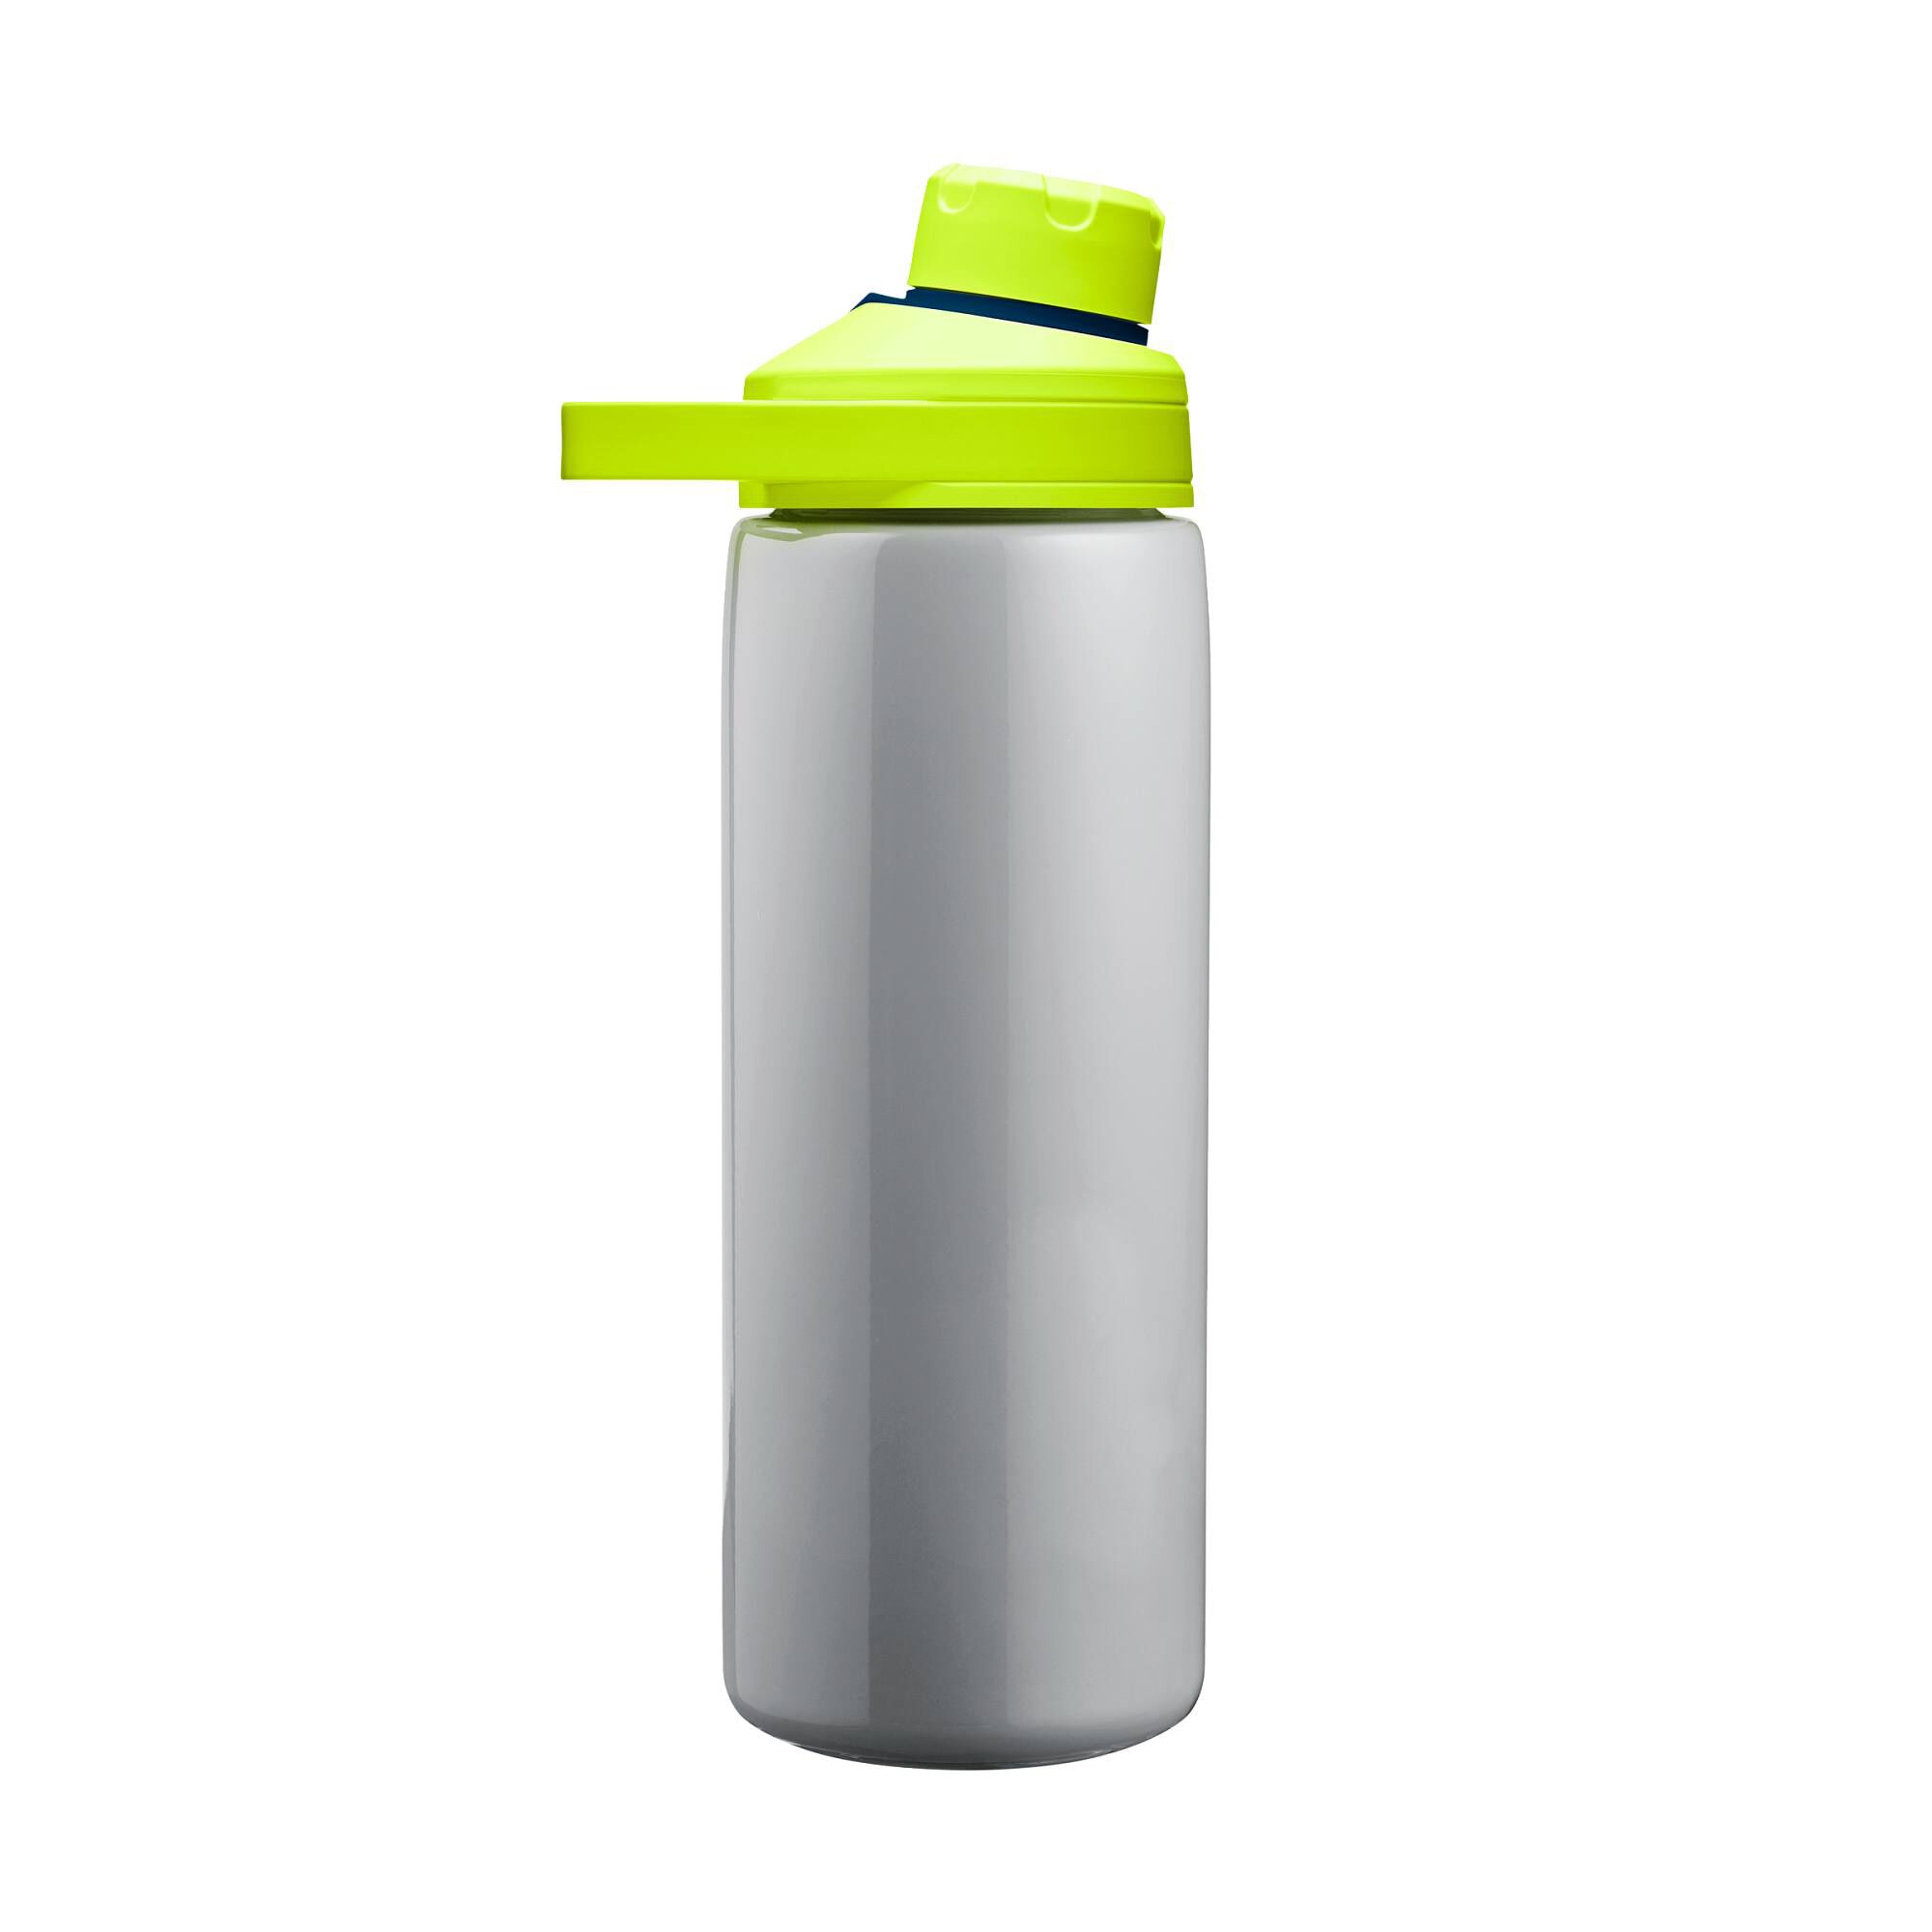 Gray New CamelBak Chute Water Bottle Replacement Cap Free Shipping 